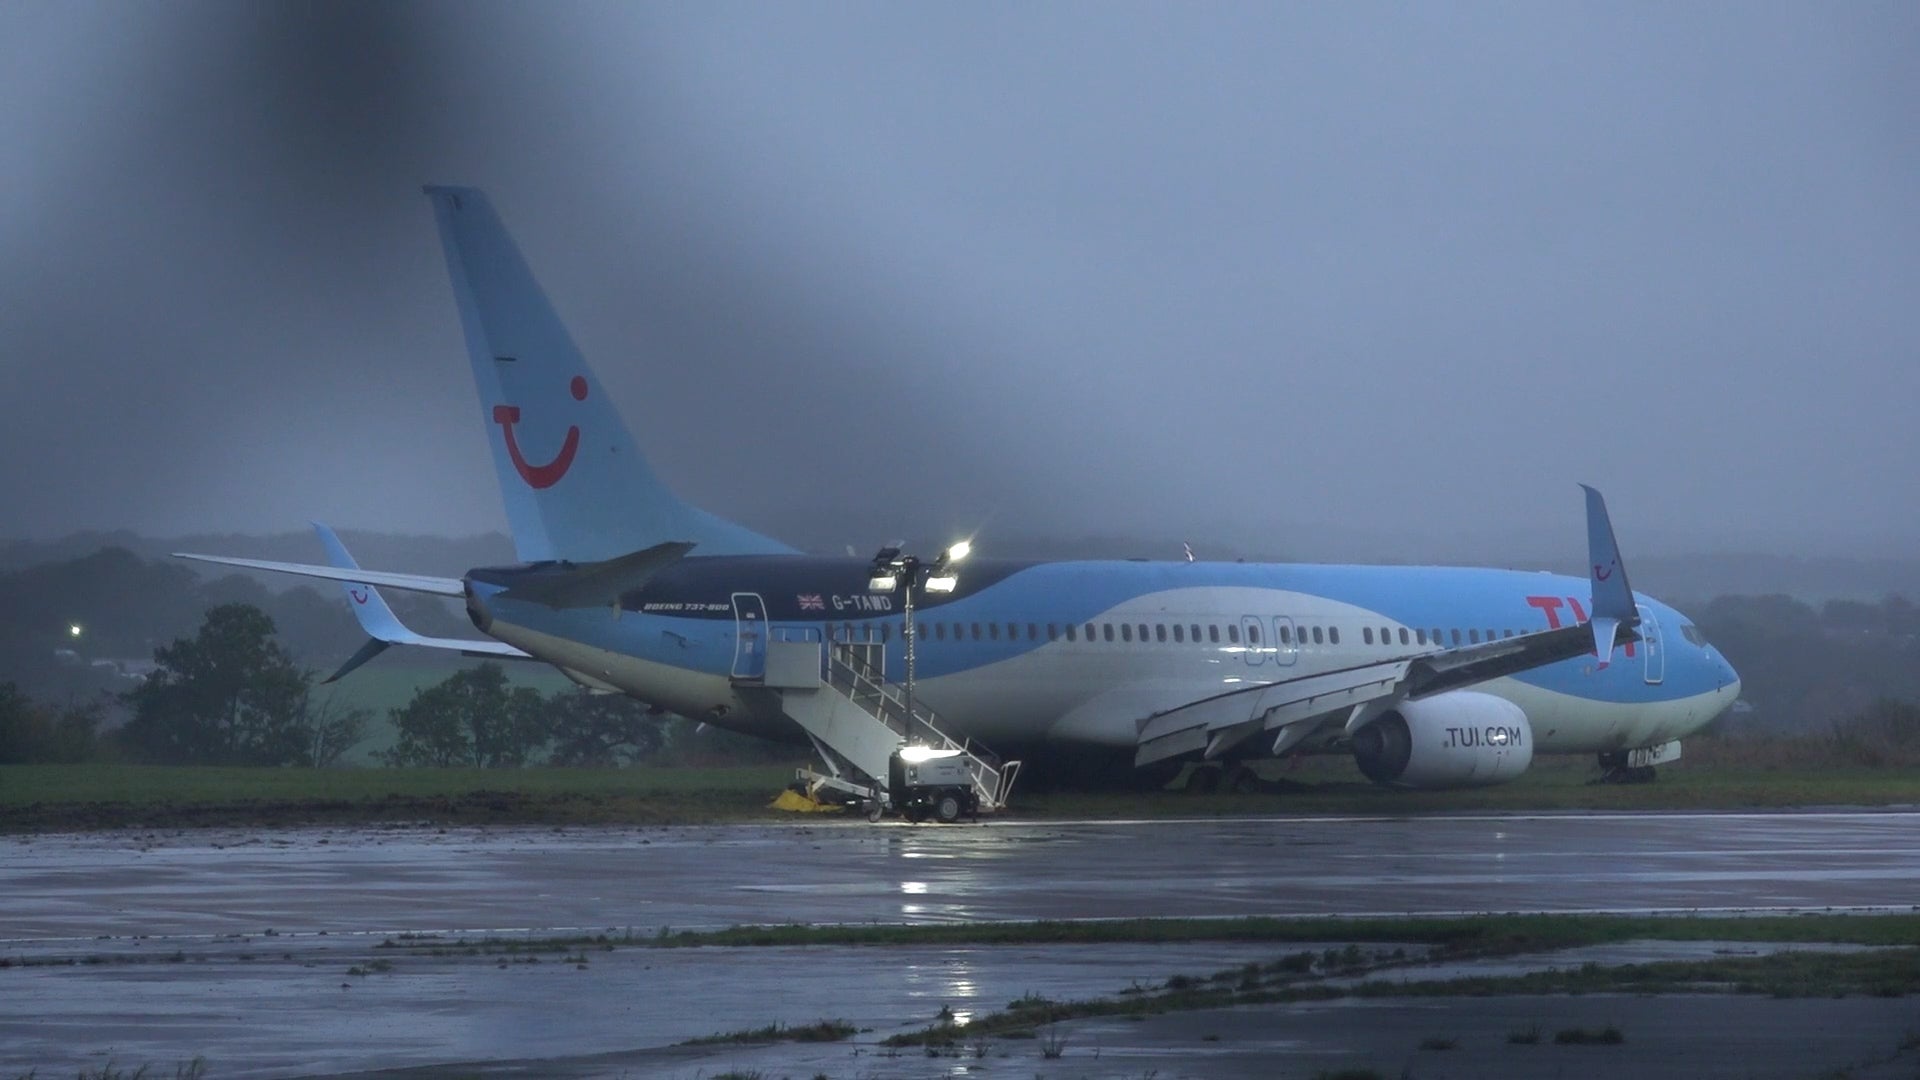 <p>Storm Babet Plane skids off runway at Leeds-Bradford Airport amid extreme weather</p>